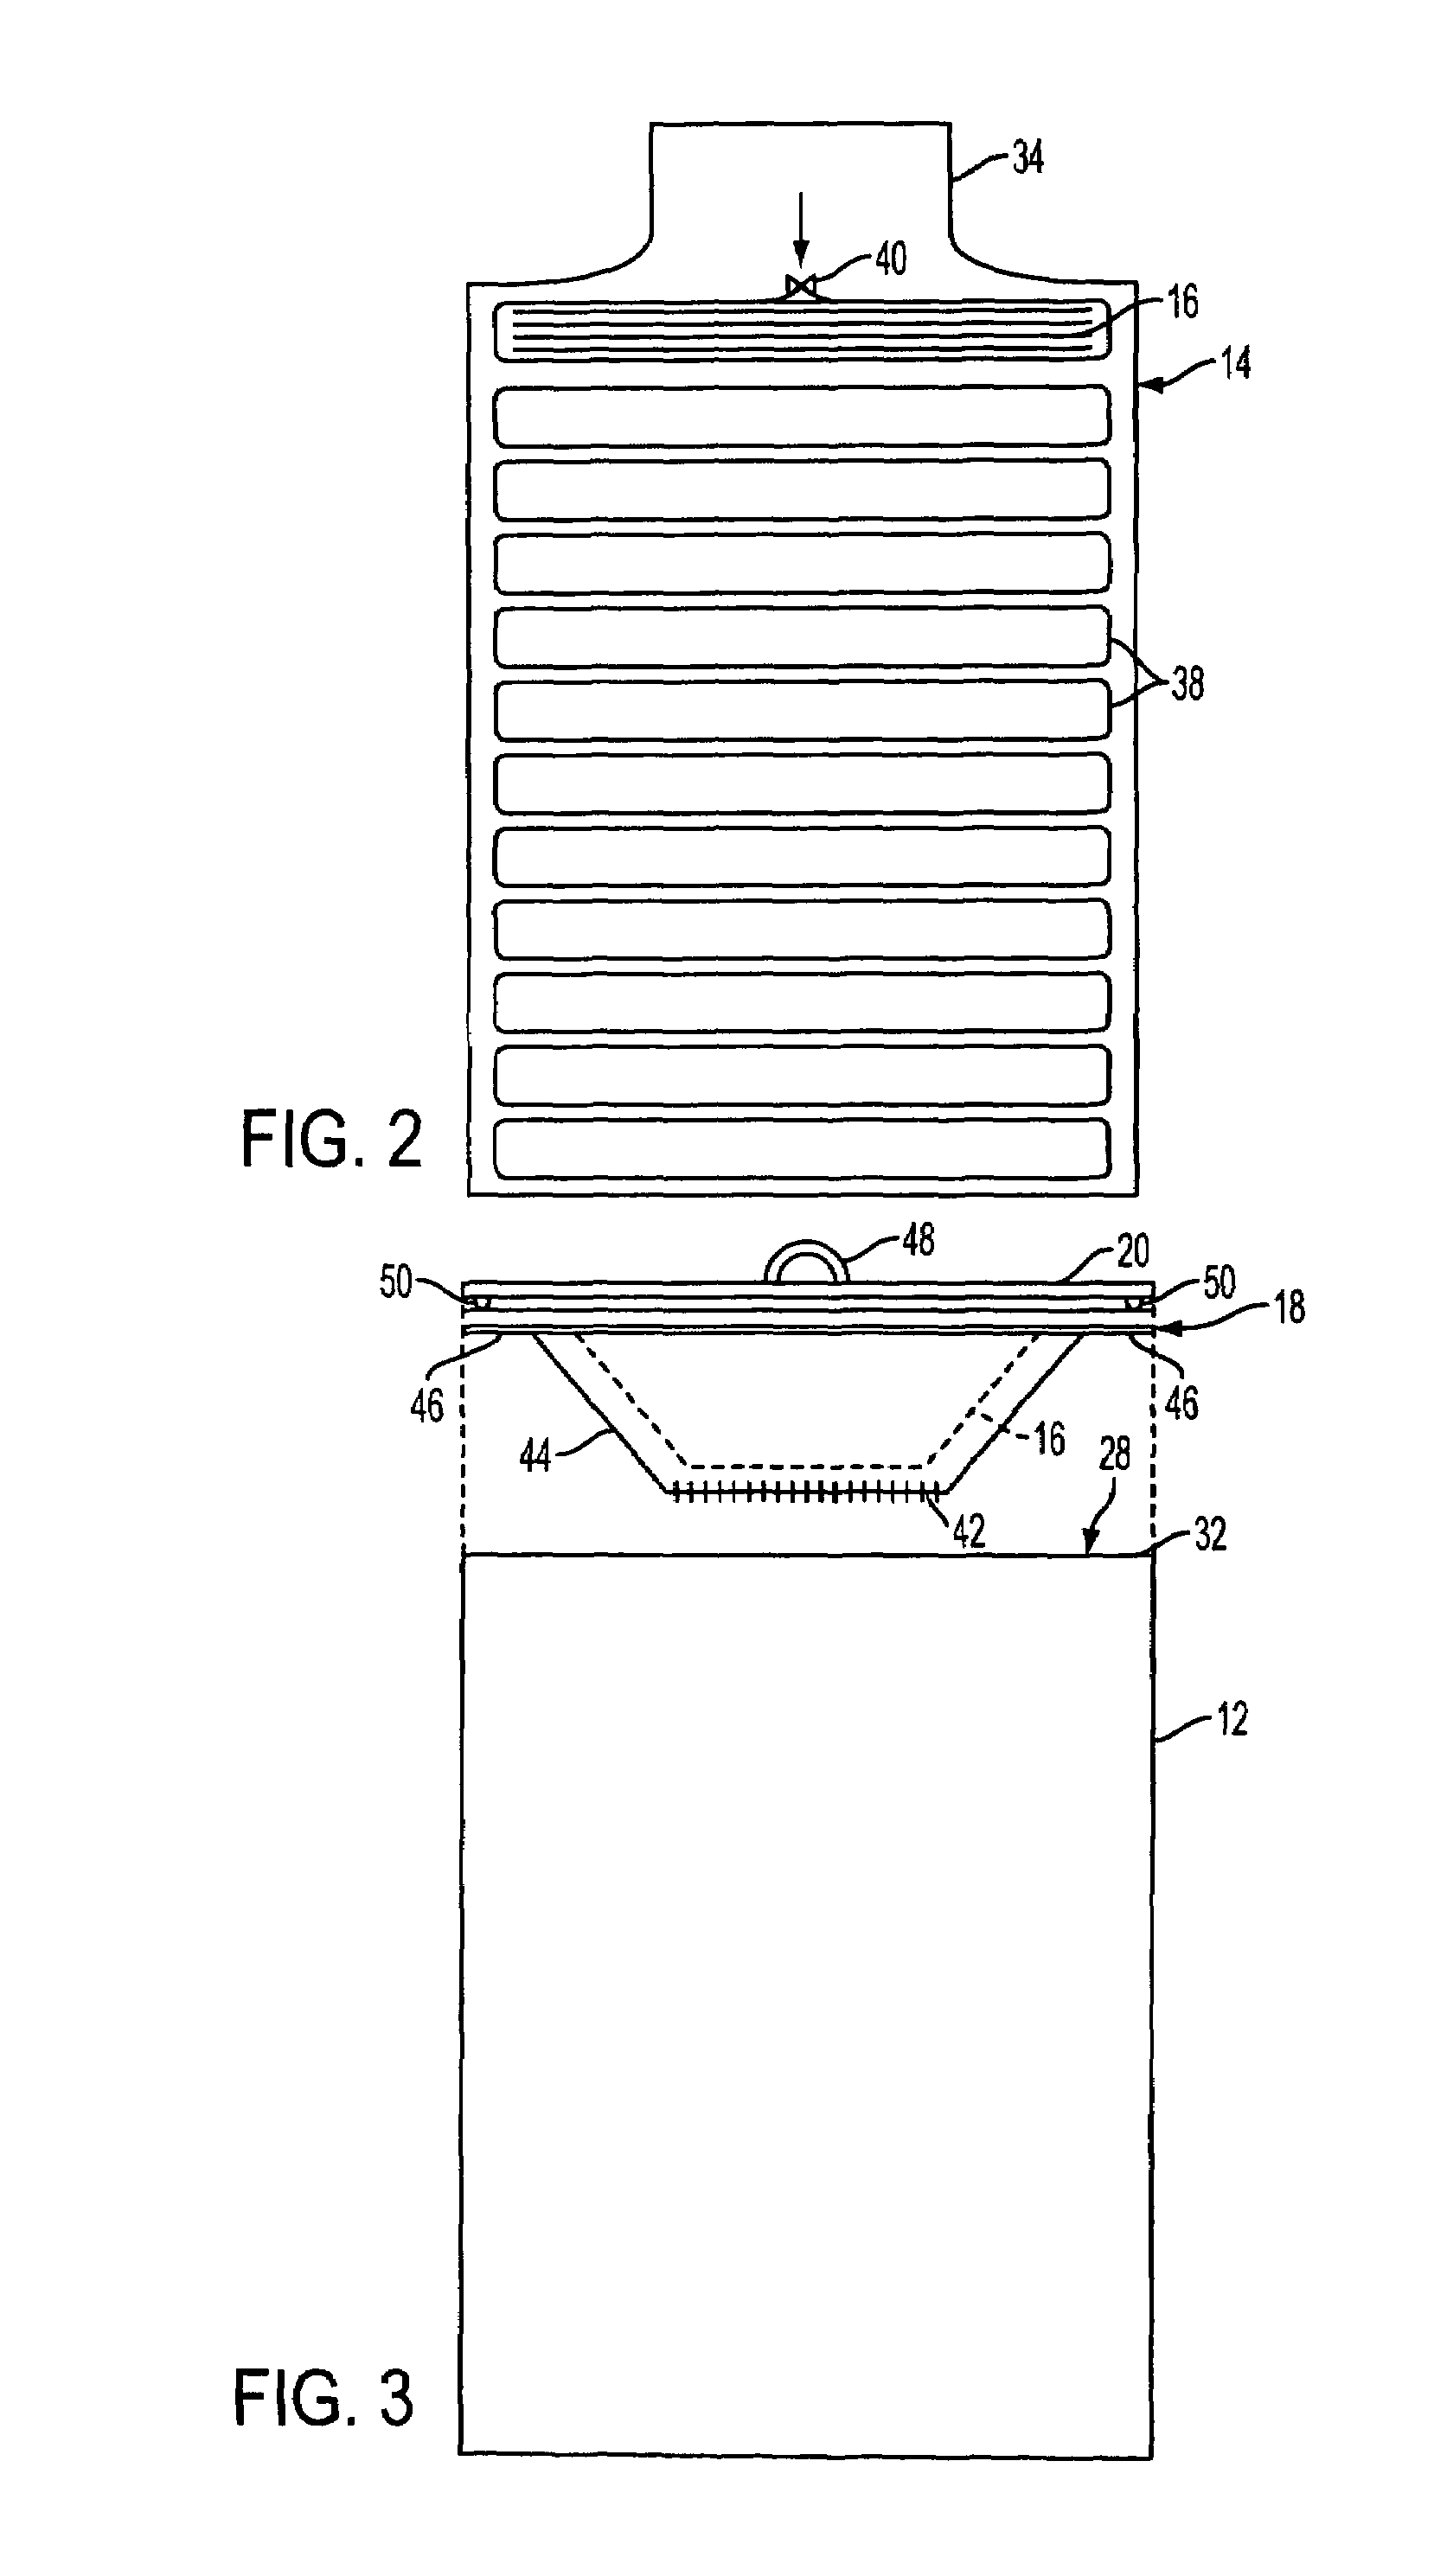 Point-of-use water treatment assembly